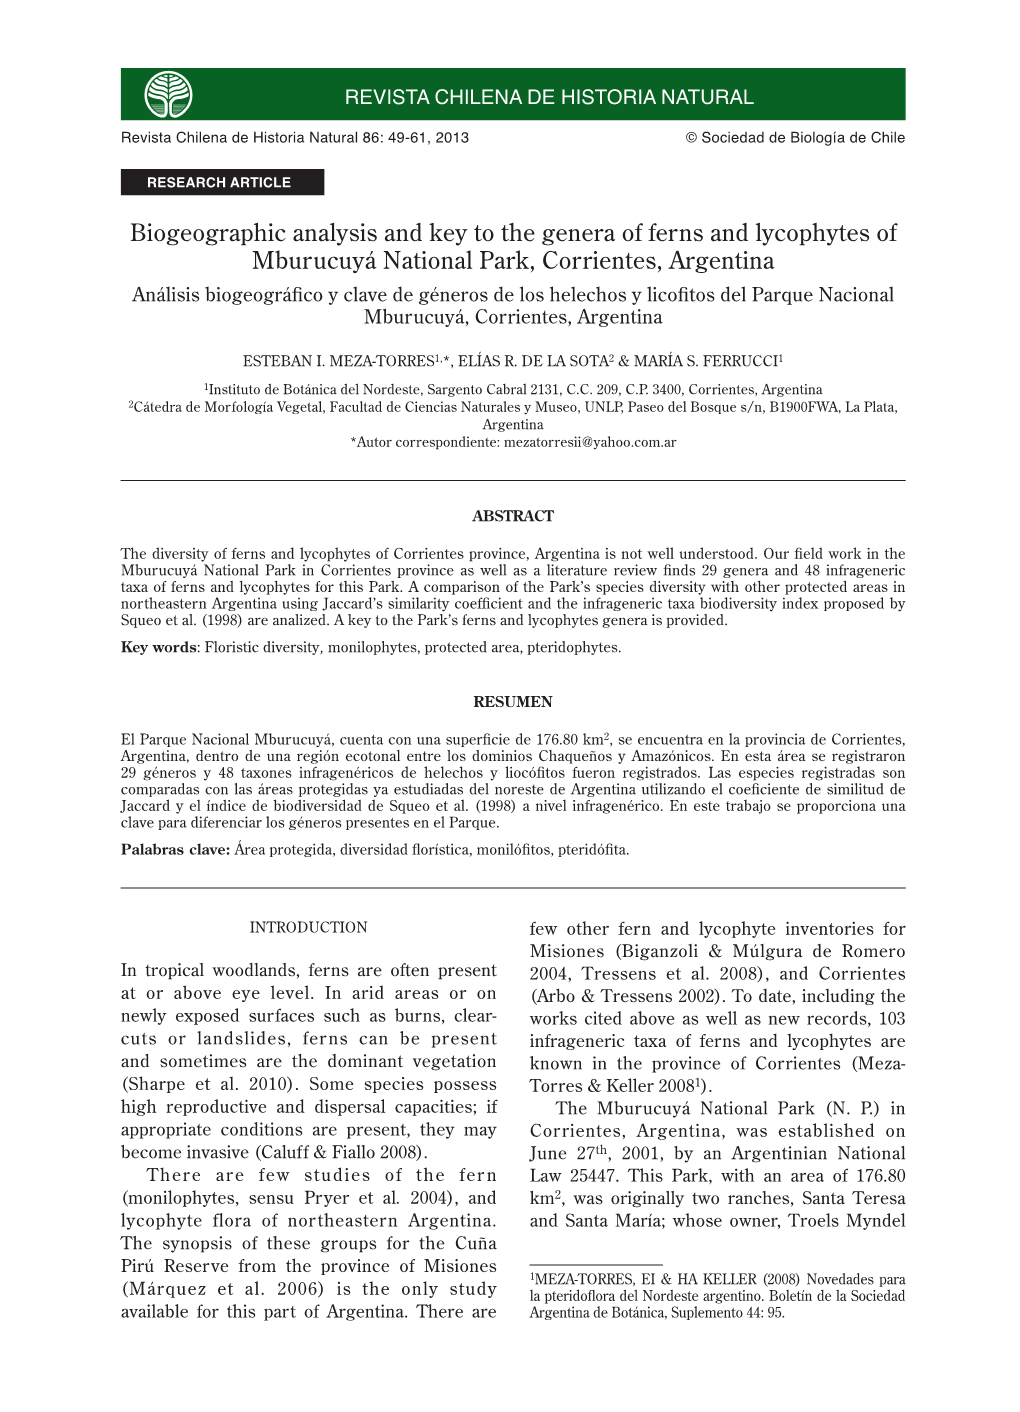 Biogeographic Analysis and Key to the Genera of Ferns and Lycophytes Of